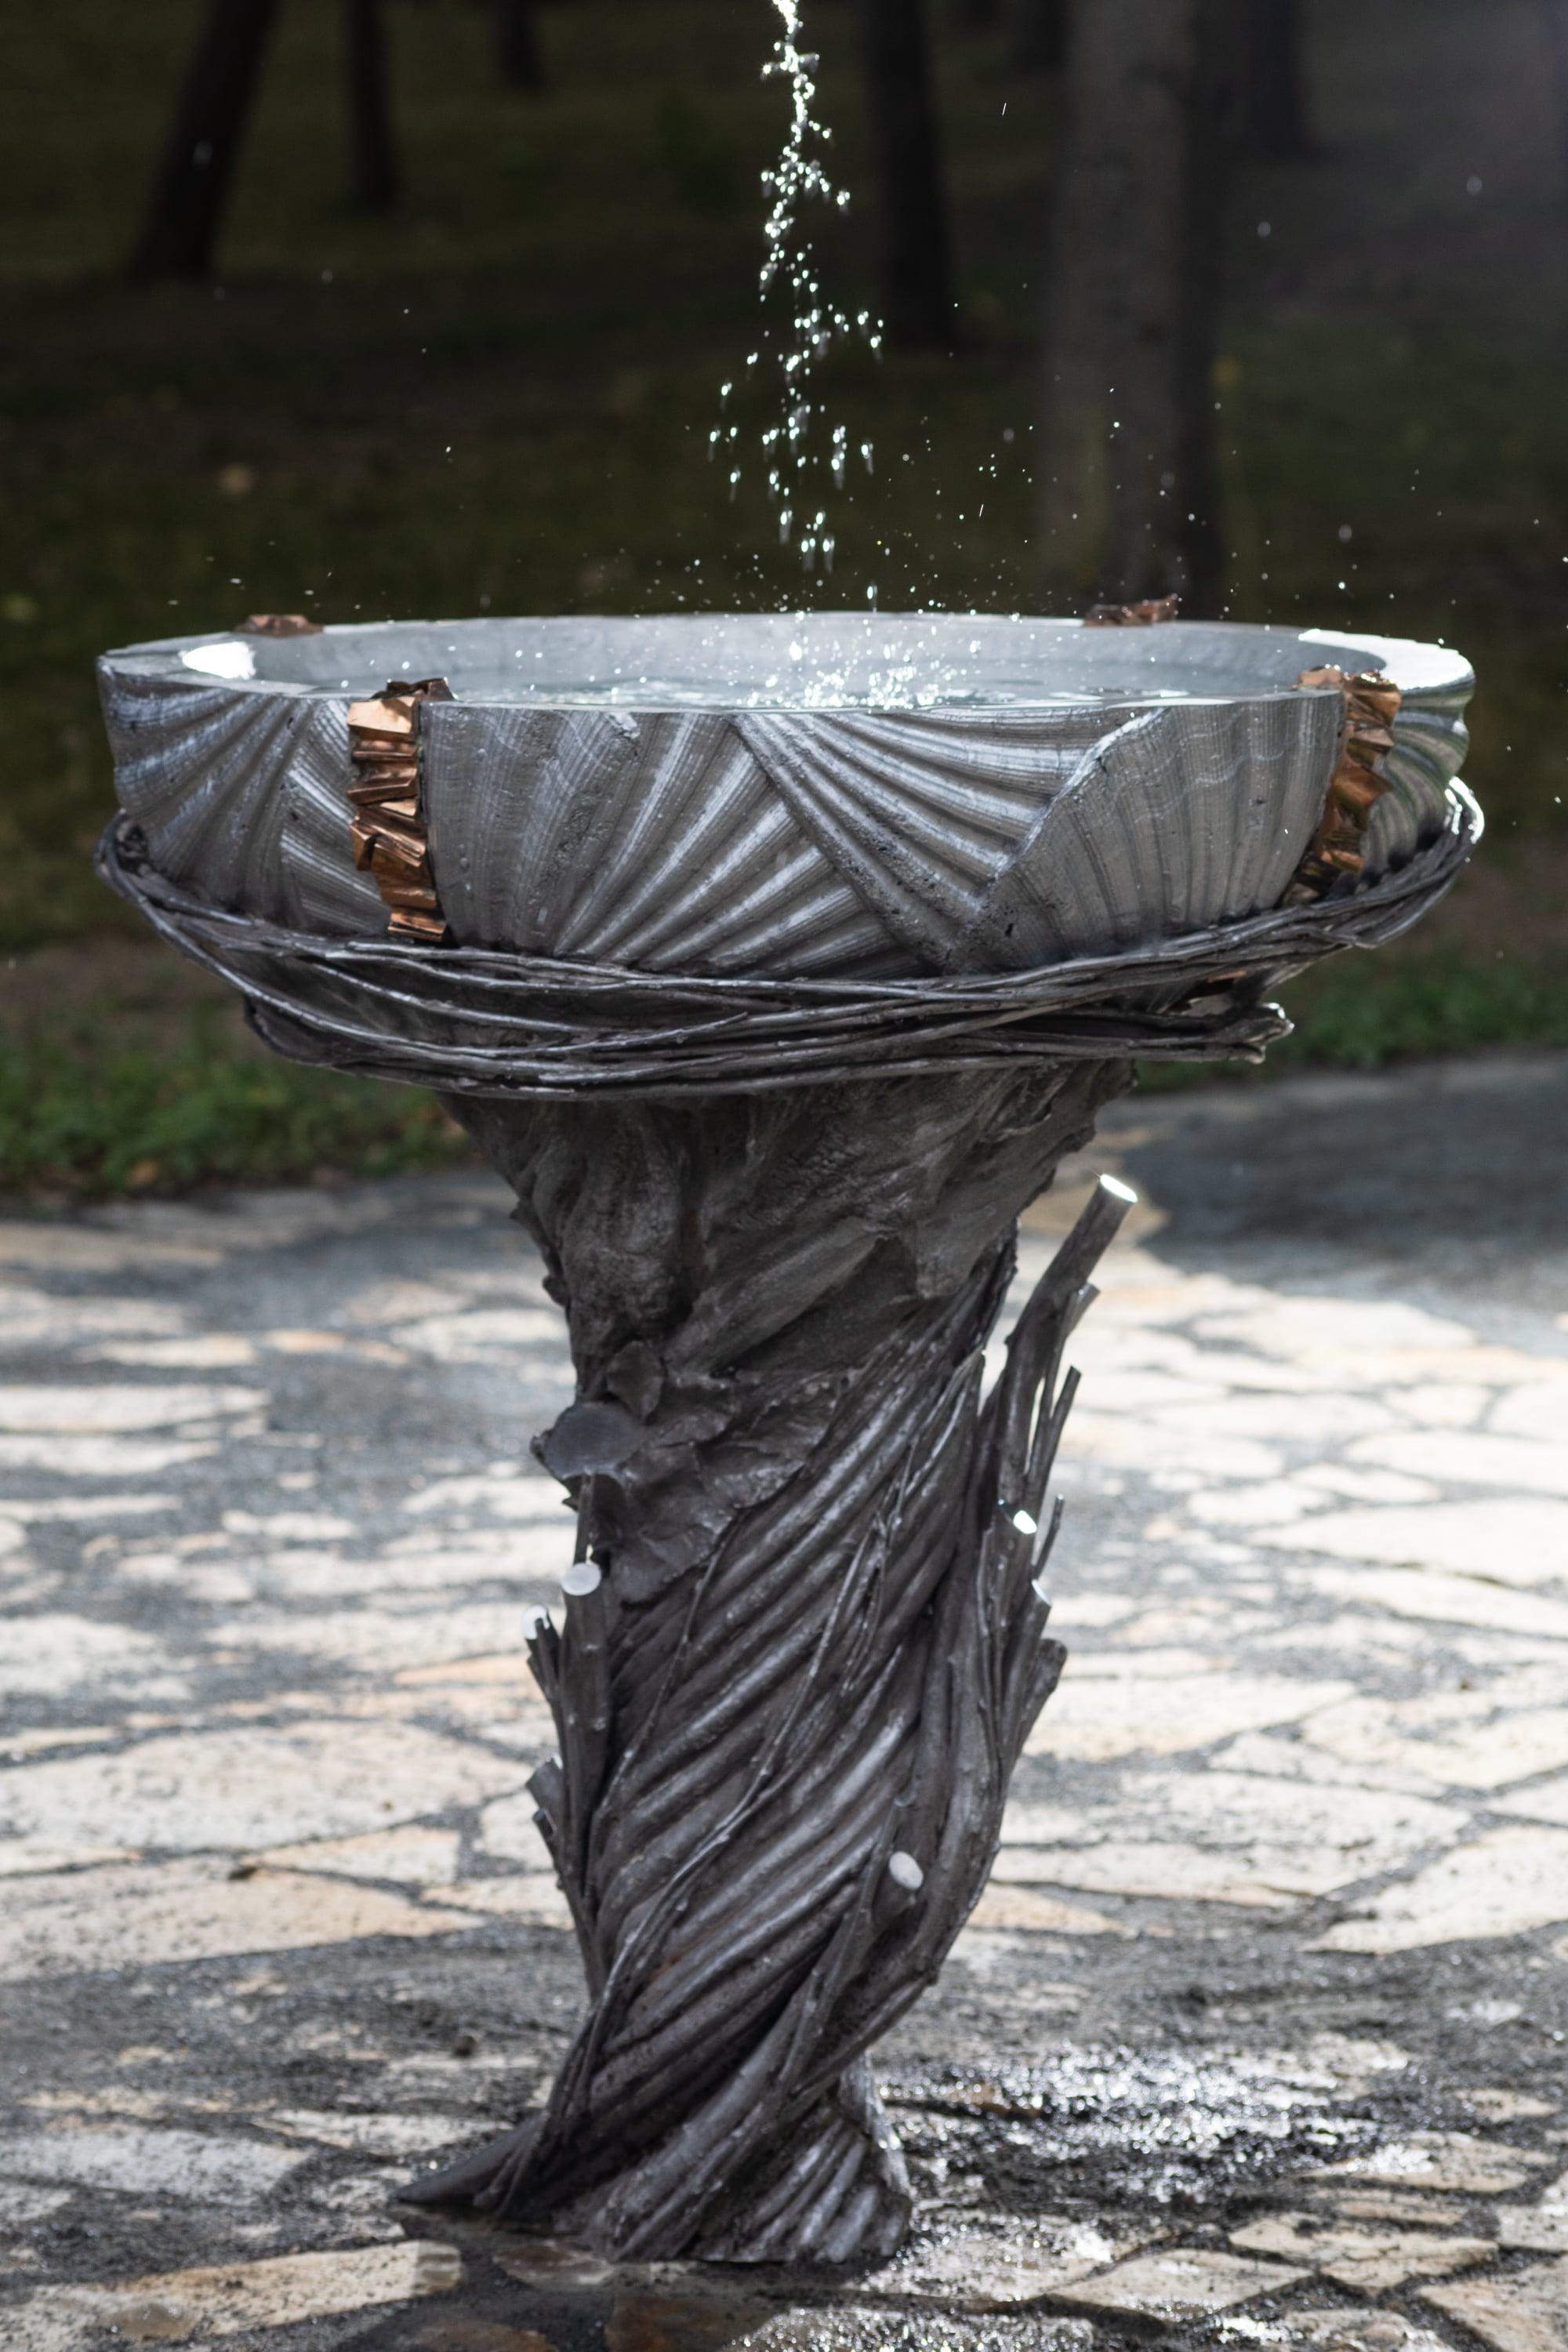 Water Element is a work in bronze and aluminum by Czech sculptor Ondřej Oliva. It is both an outdoor sculpture and a large garden water basin. The water is static. A drain plug situated in the center of the basin allows easy emptying of the